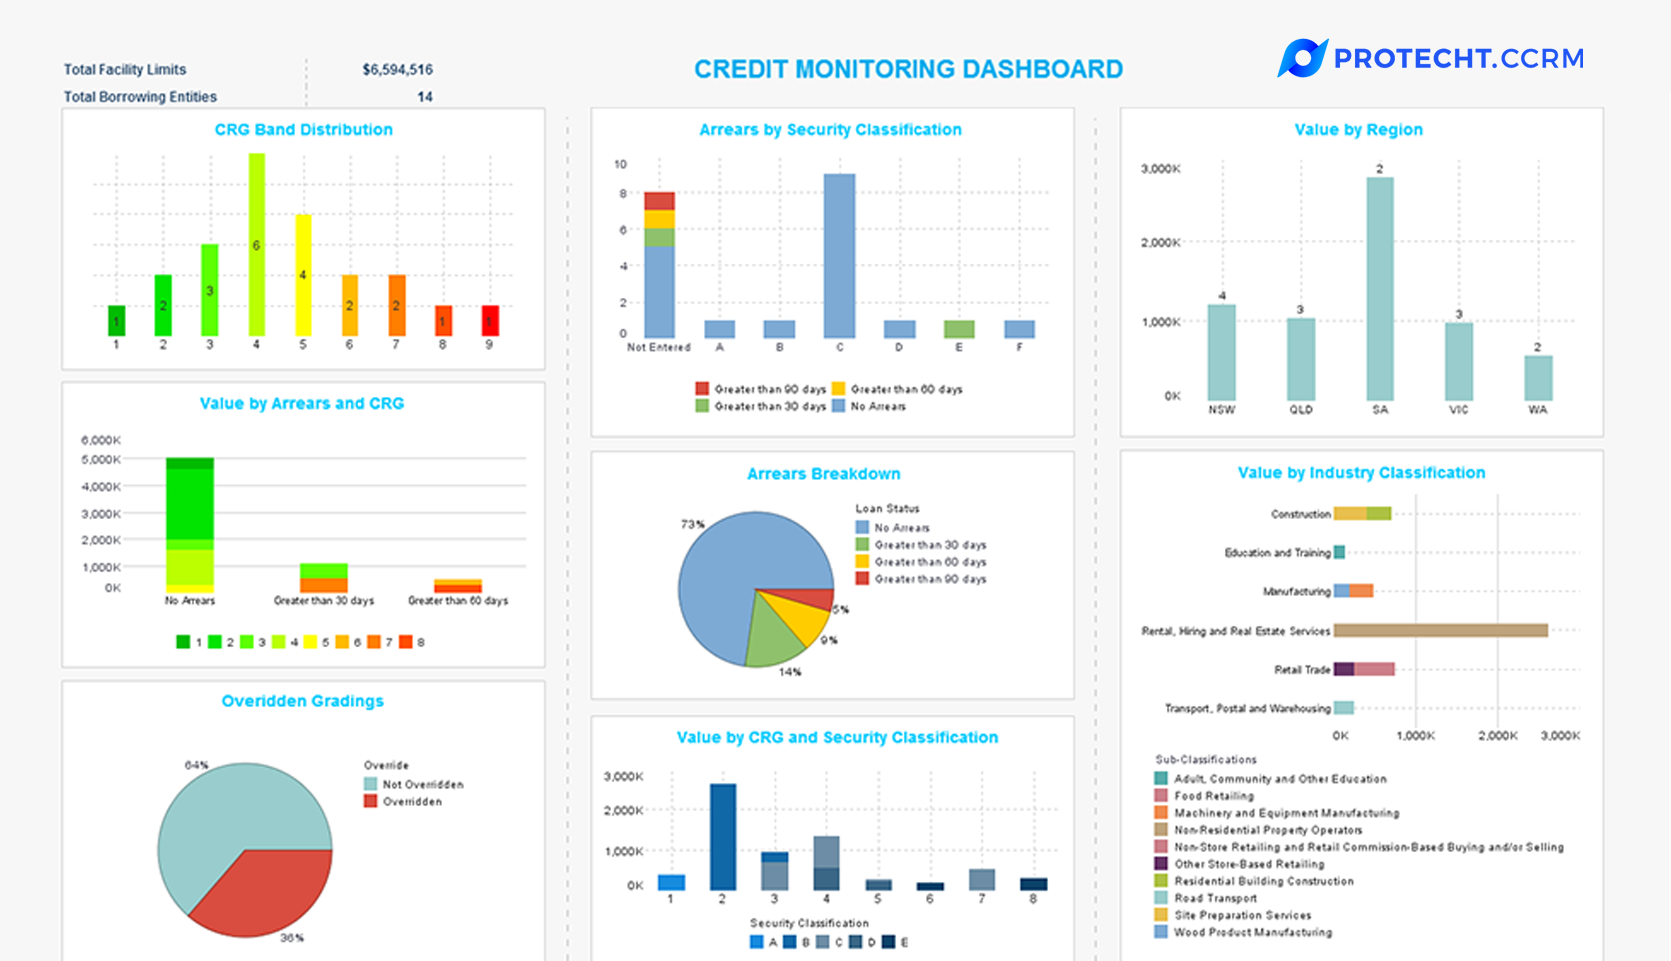 Credit Risk Analysis & Management Software Solutions | Protecht